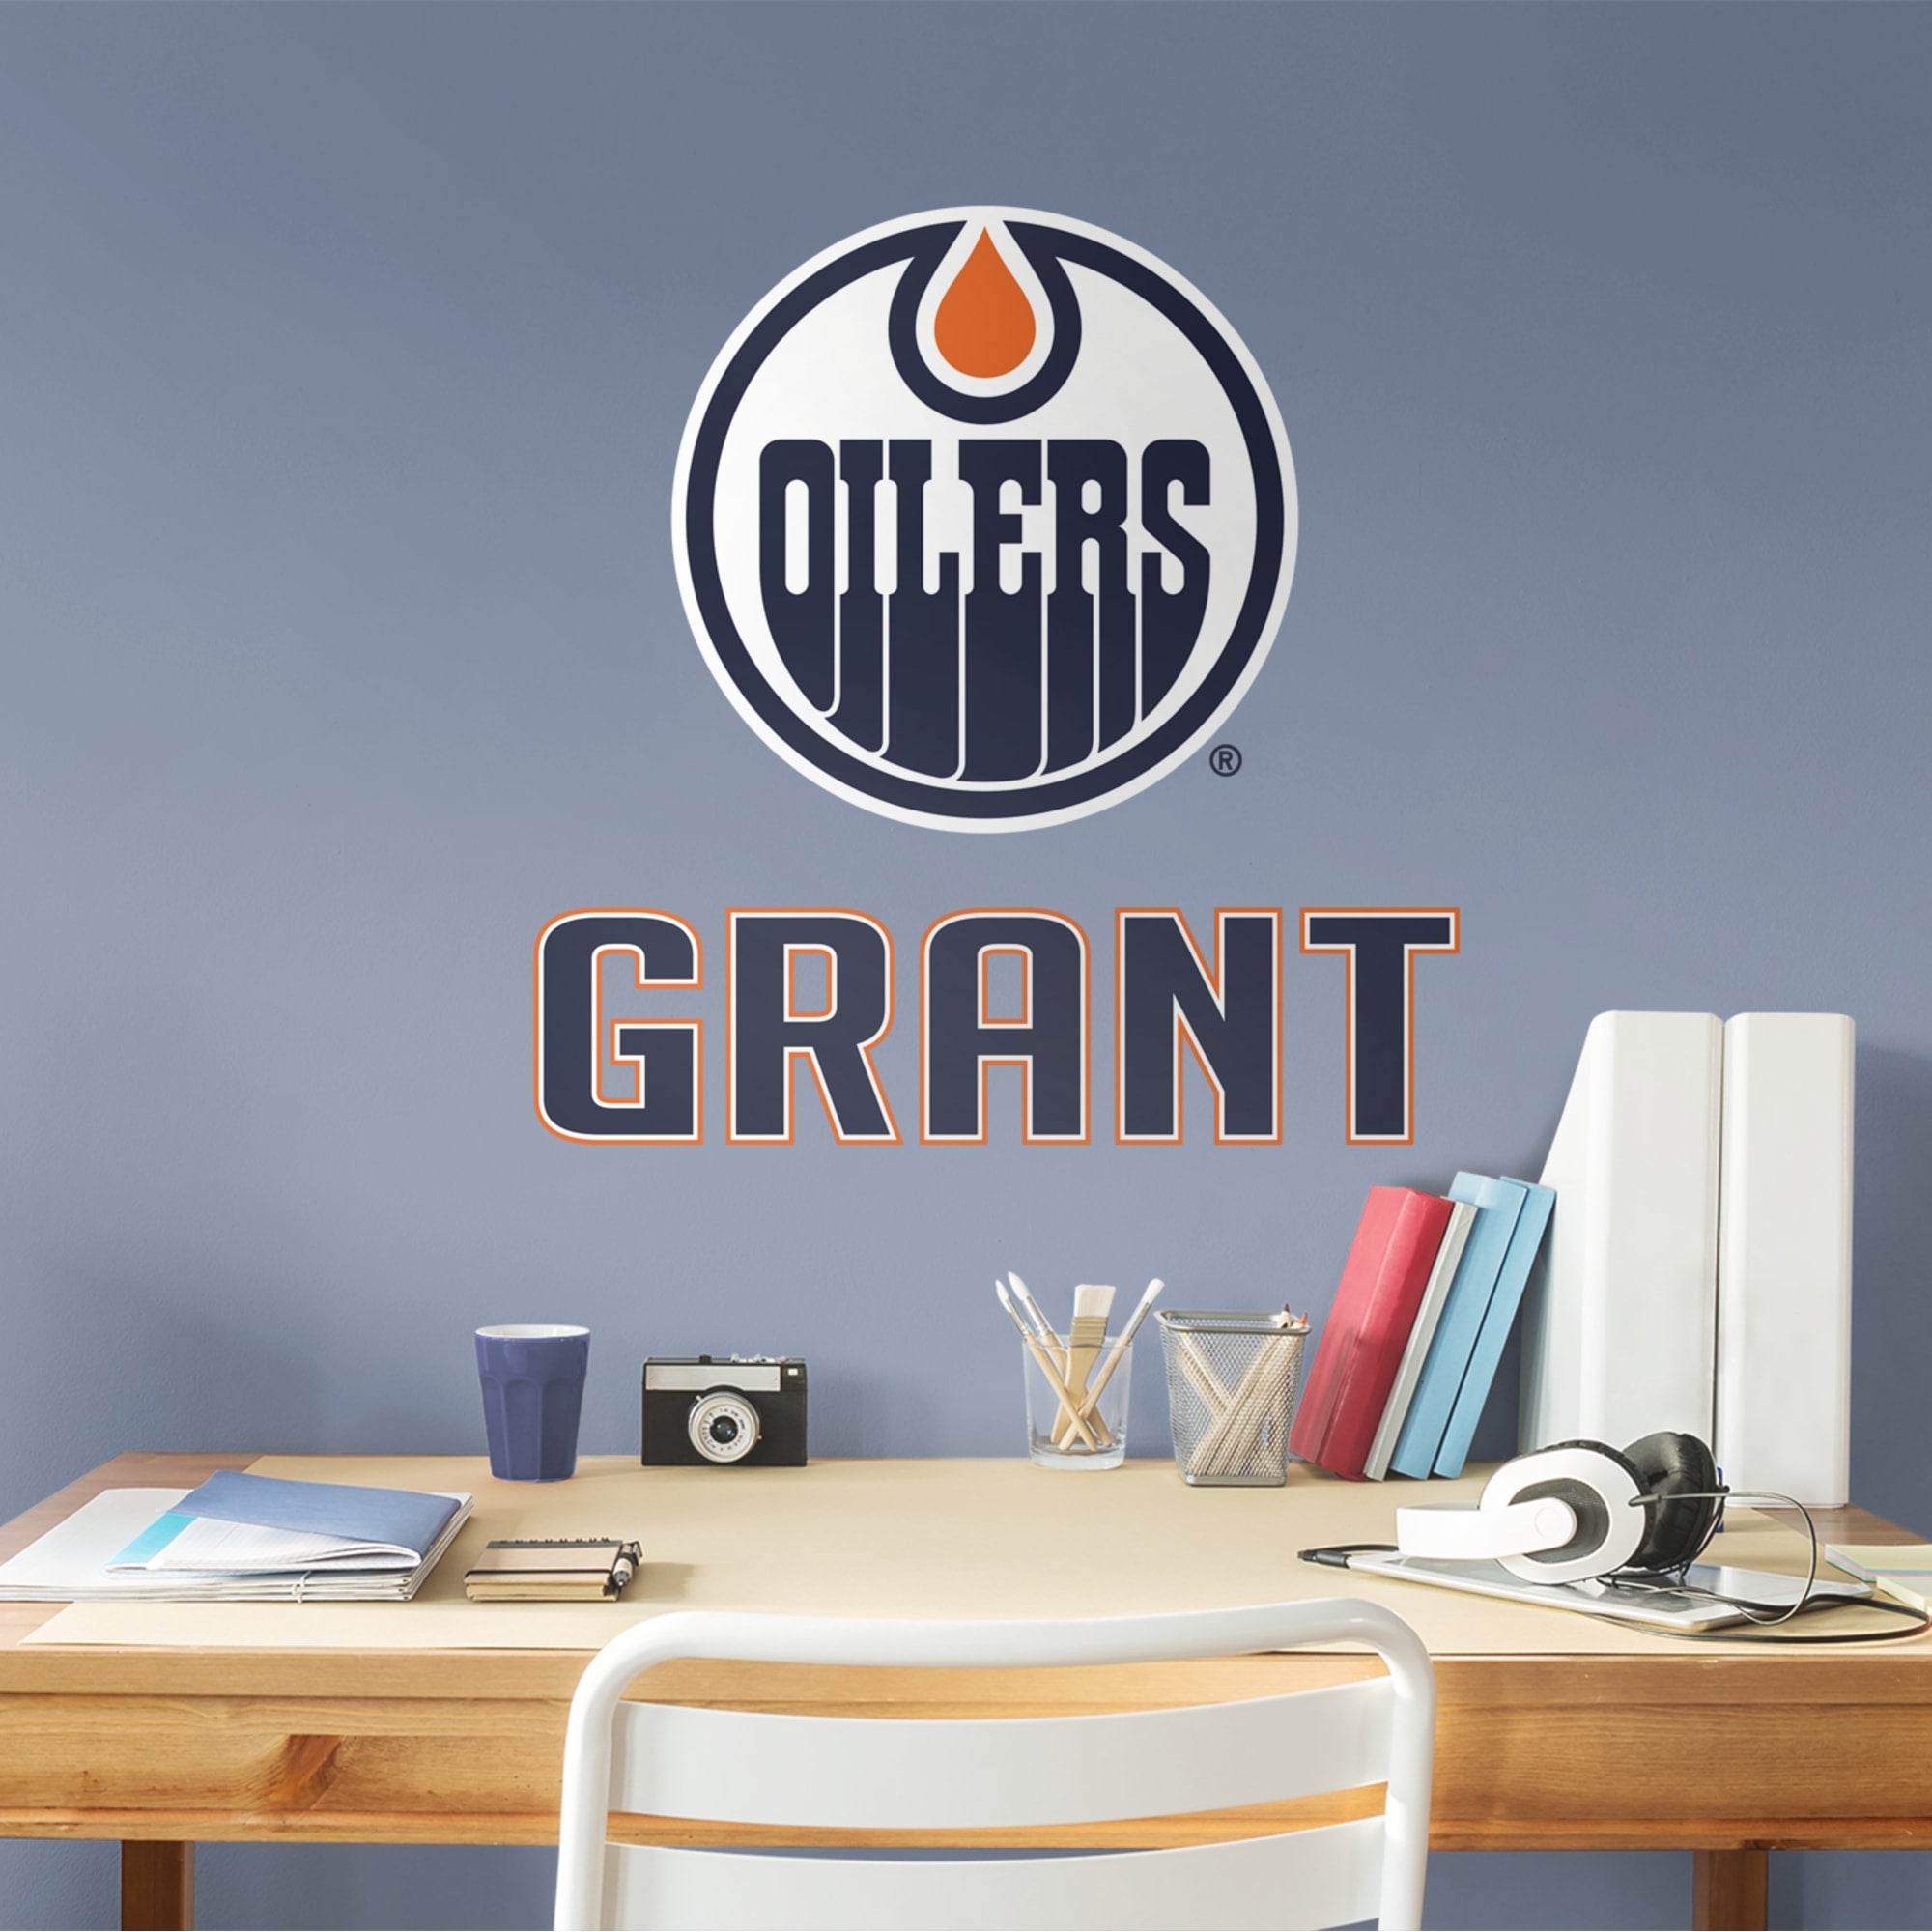 Edmonton Oilers Stacked Personalized Name - Officially Licensed NHL Transfer Decal in Navy (22"W x 22"H) by Fathead | Vinyl